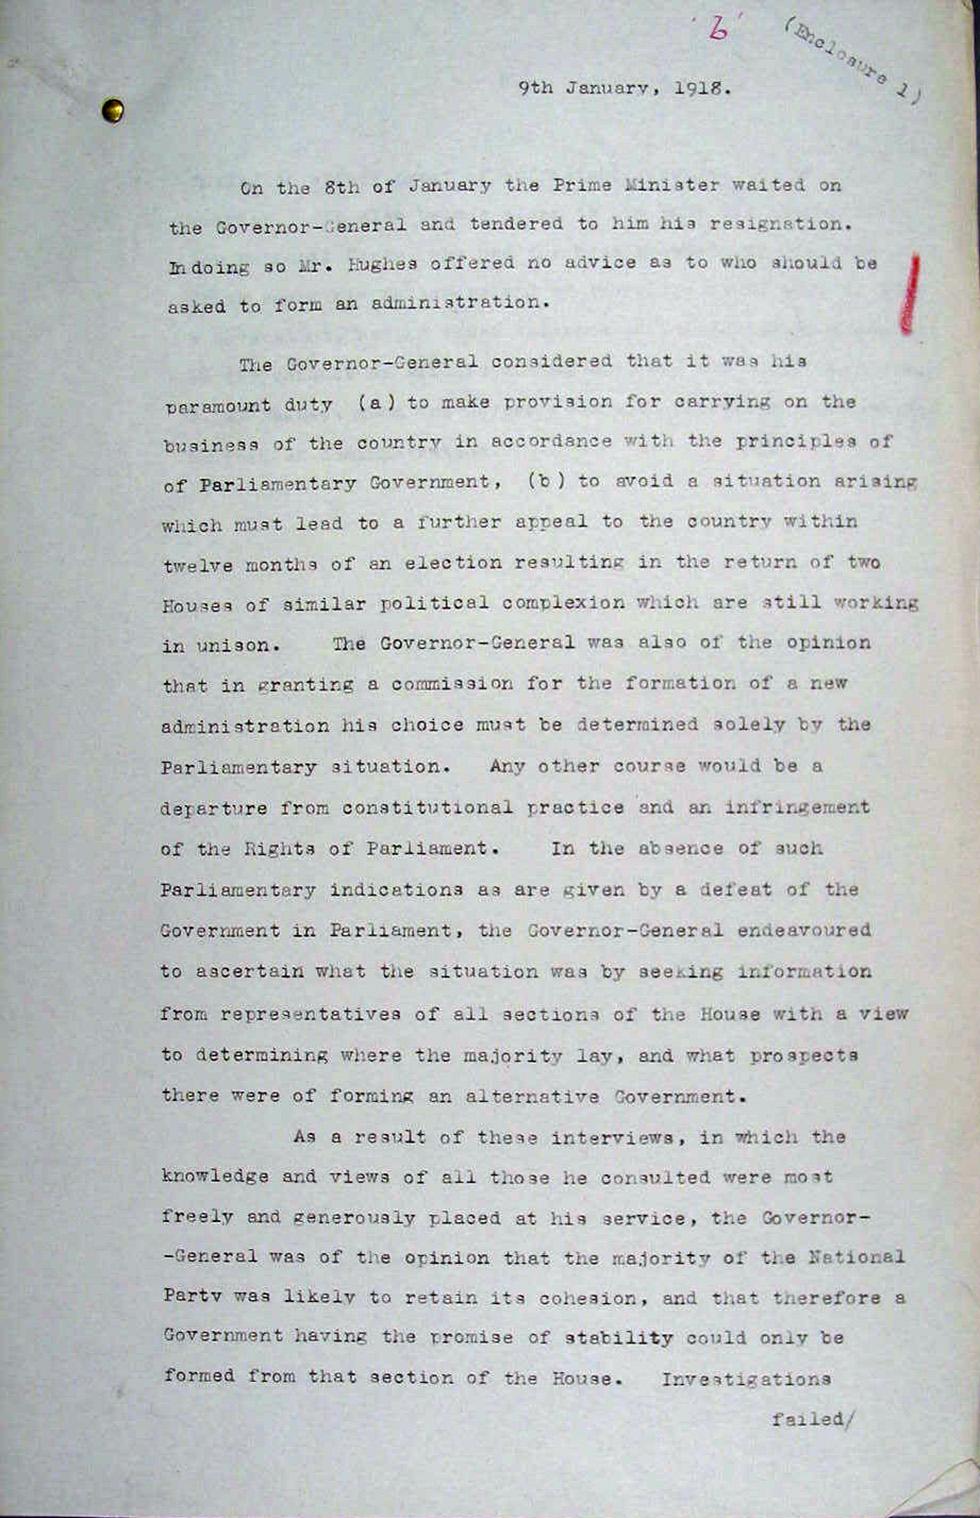 The record of the Governor-General's response after WM Hughes resigned as Prime Minister on 9 January 1918.